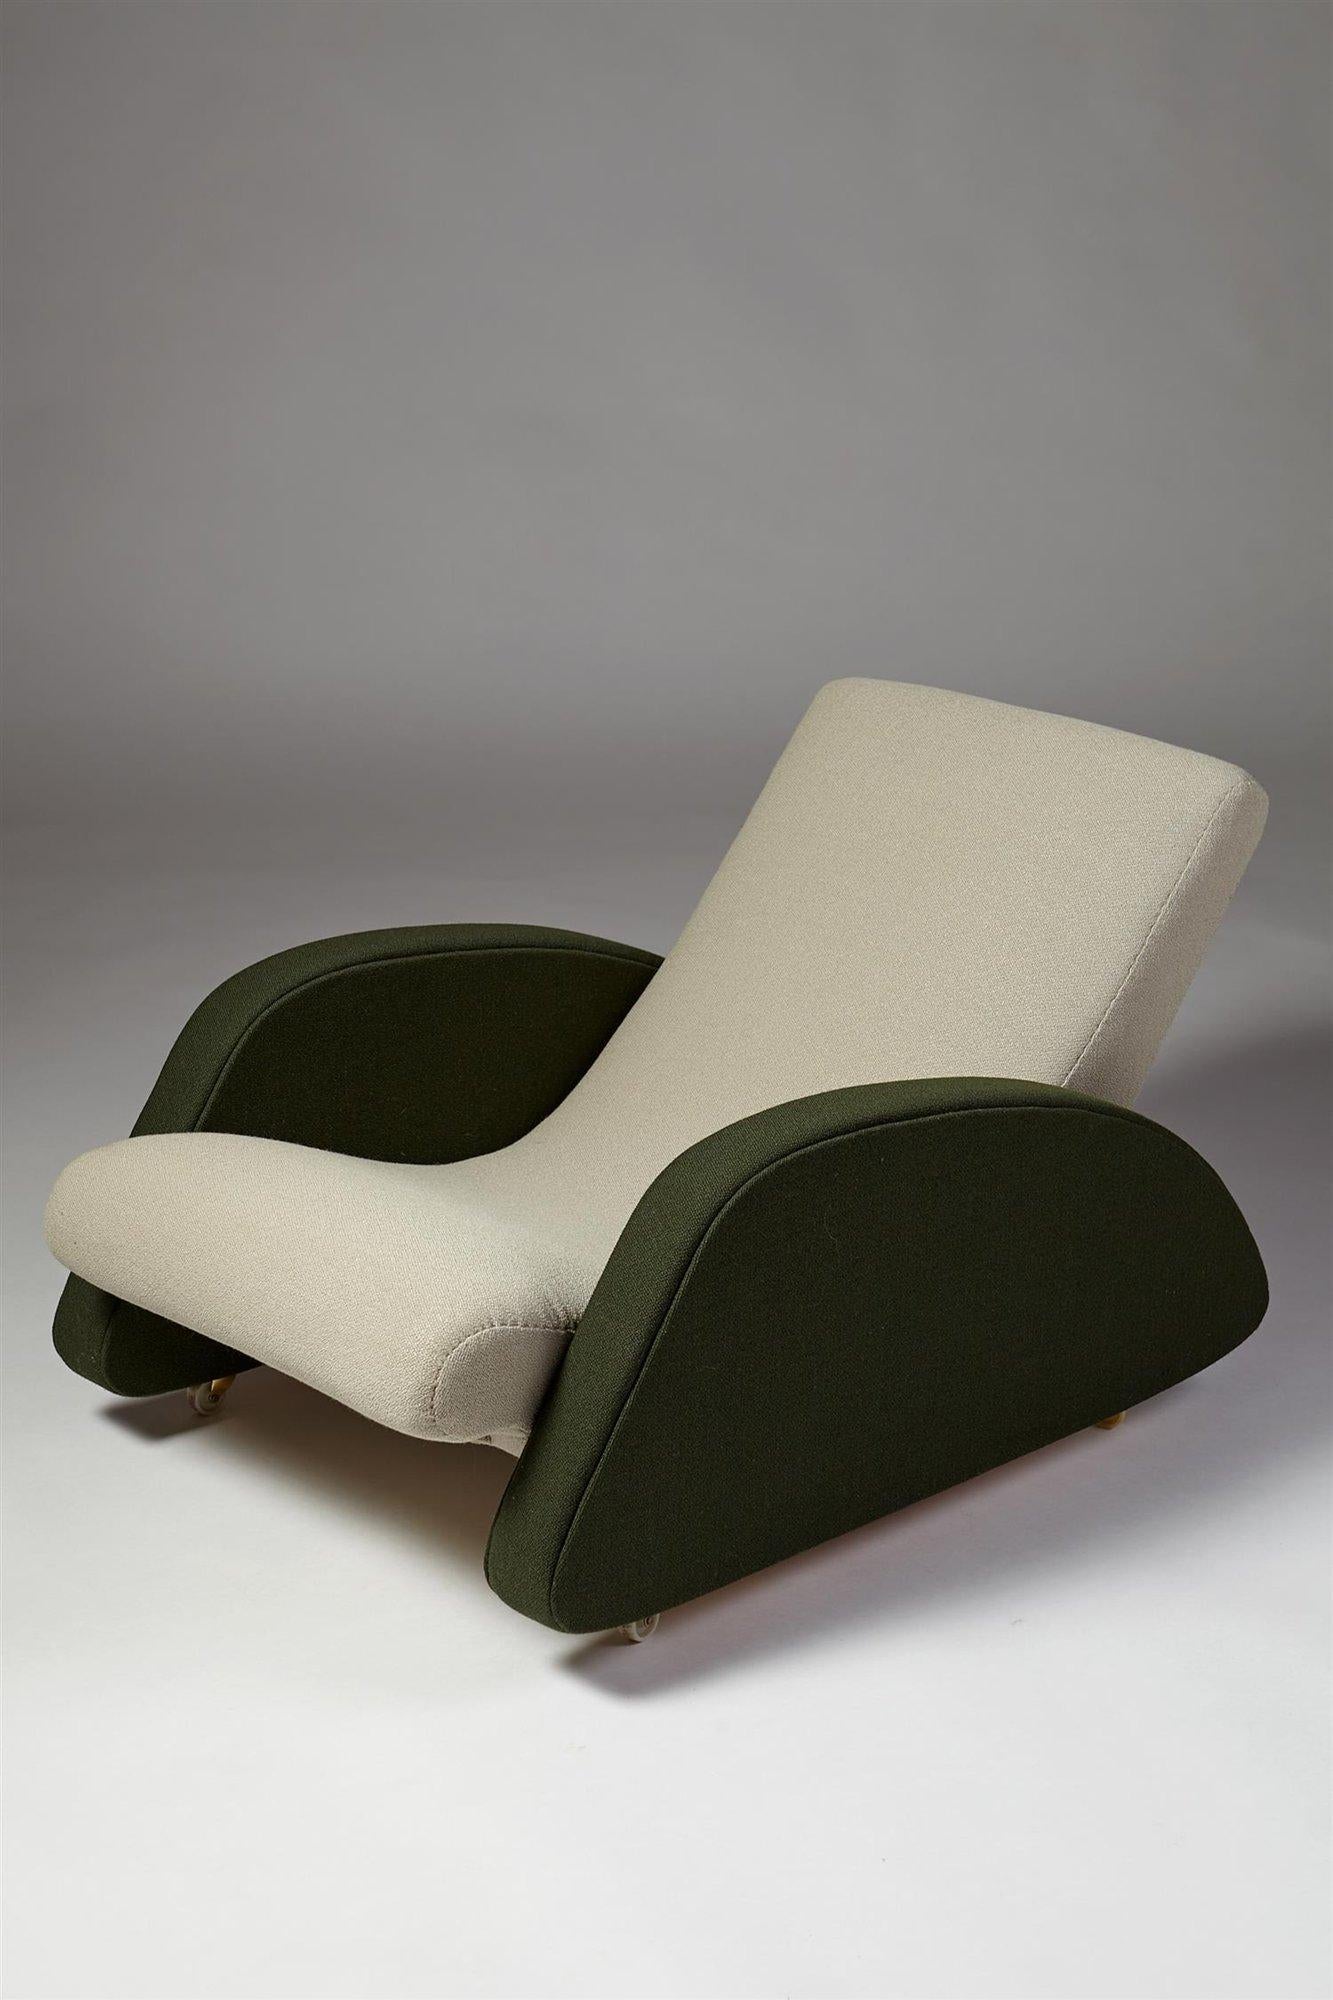 Armchair designed by Bo Wretling for Otto Wretling,
Sweden. 1930's.

Wool upholstery.

Measurements:
L: 113 cm/ 44 1/2''
H: 65 cm/ 25 1/2''
W; 74 cm/ 29''
Width of seat cushion: 56 cm/ 22''
Seat height: 38 cm/ 15''